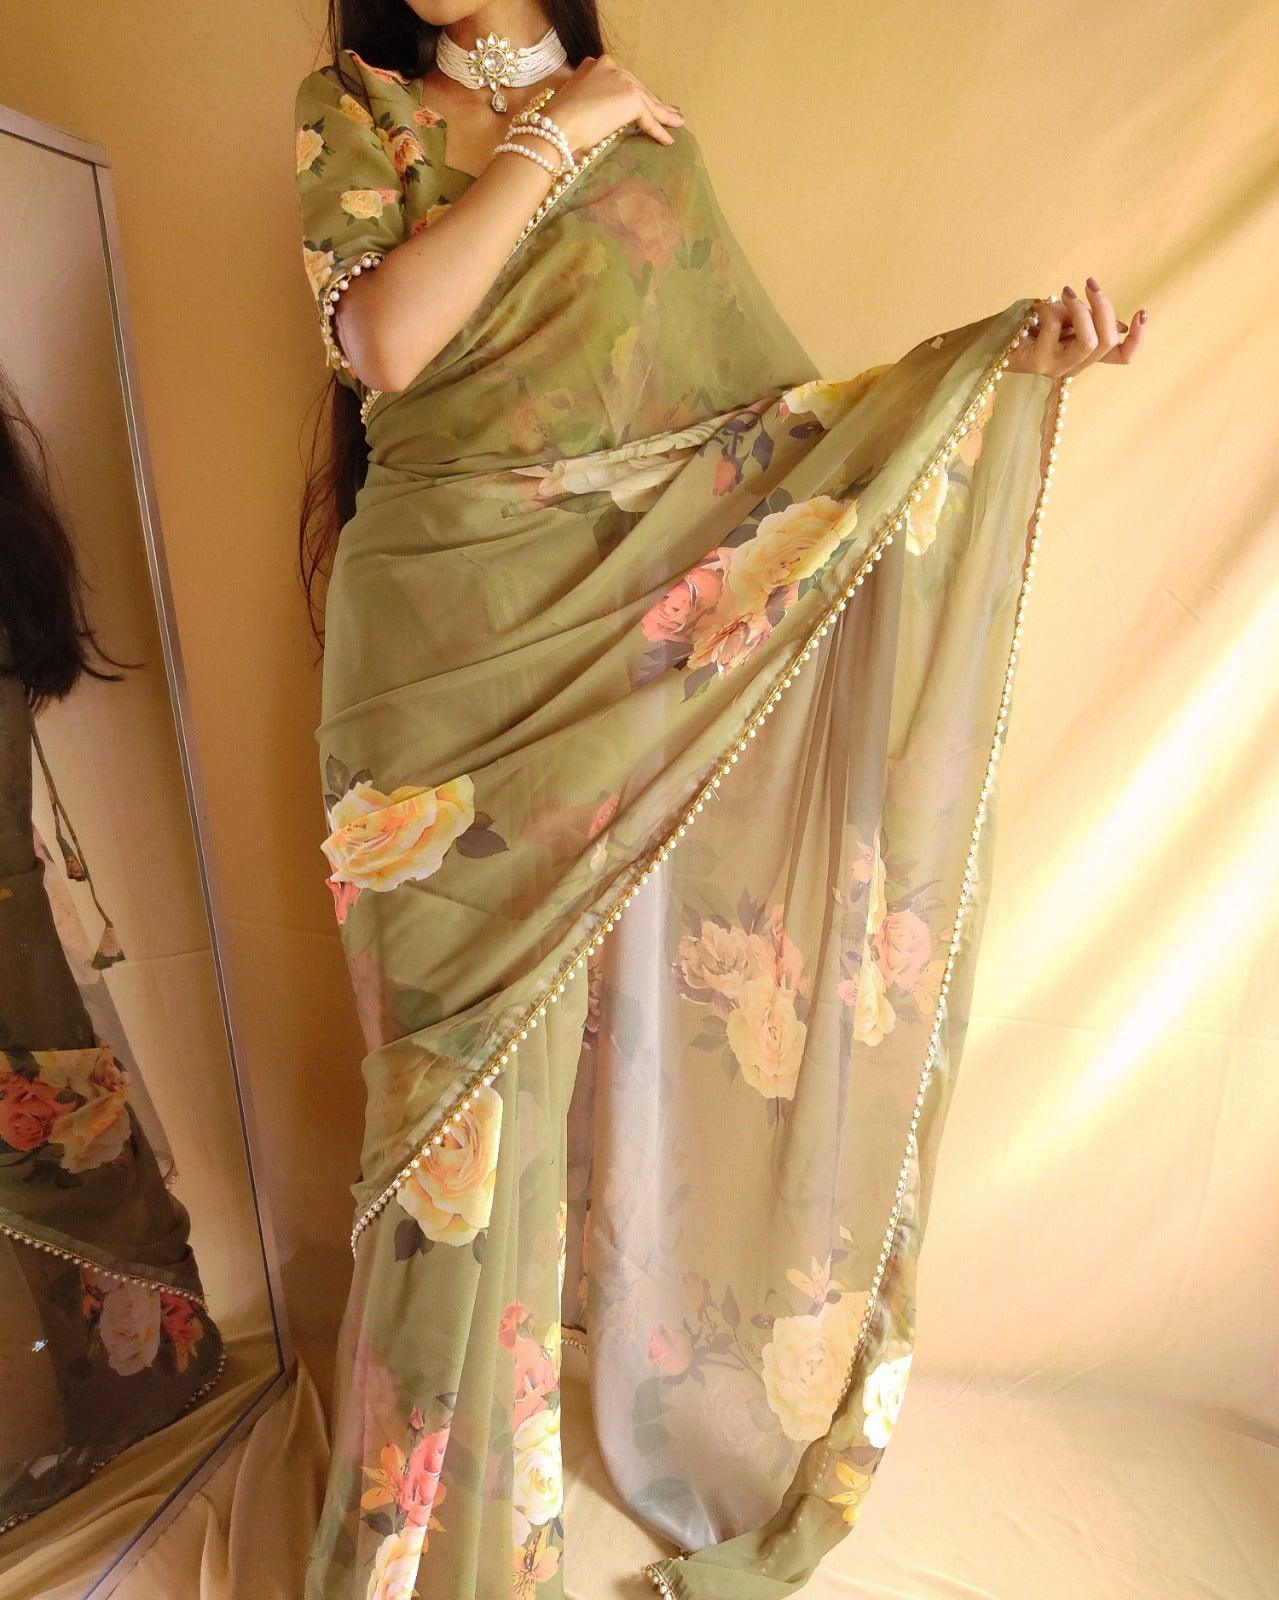 Olive Green Floral Summer Classy Georgette Printed Saree with Pearl Lace Border - Inayakhan Shop 